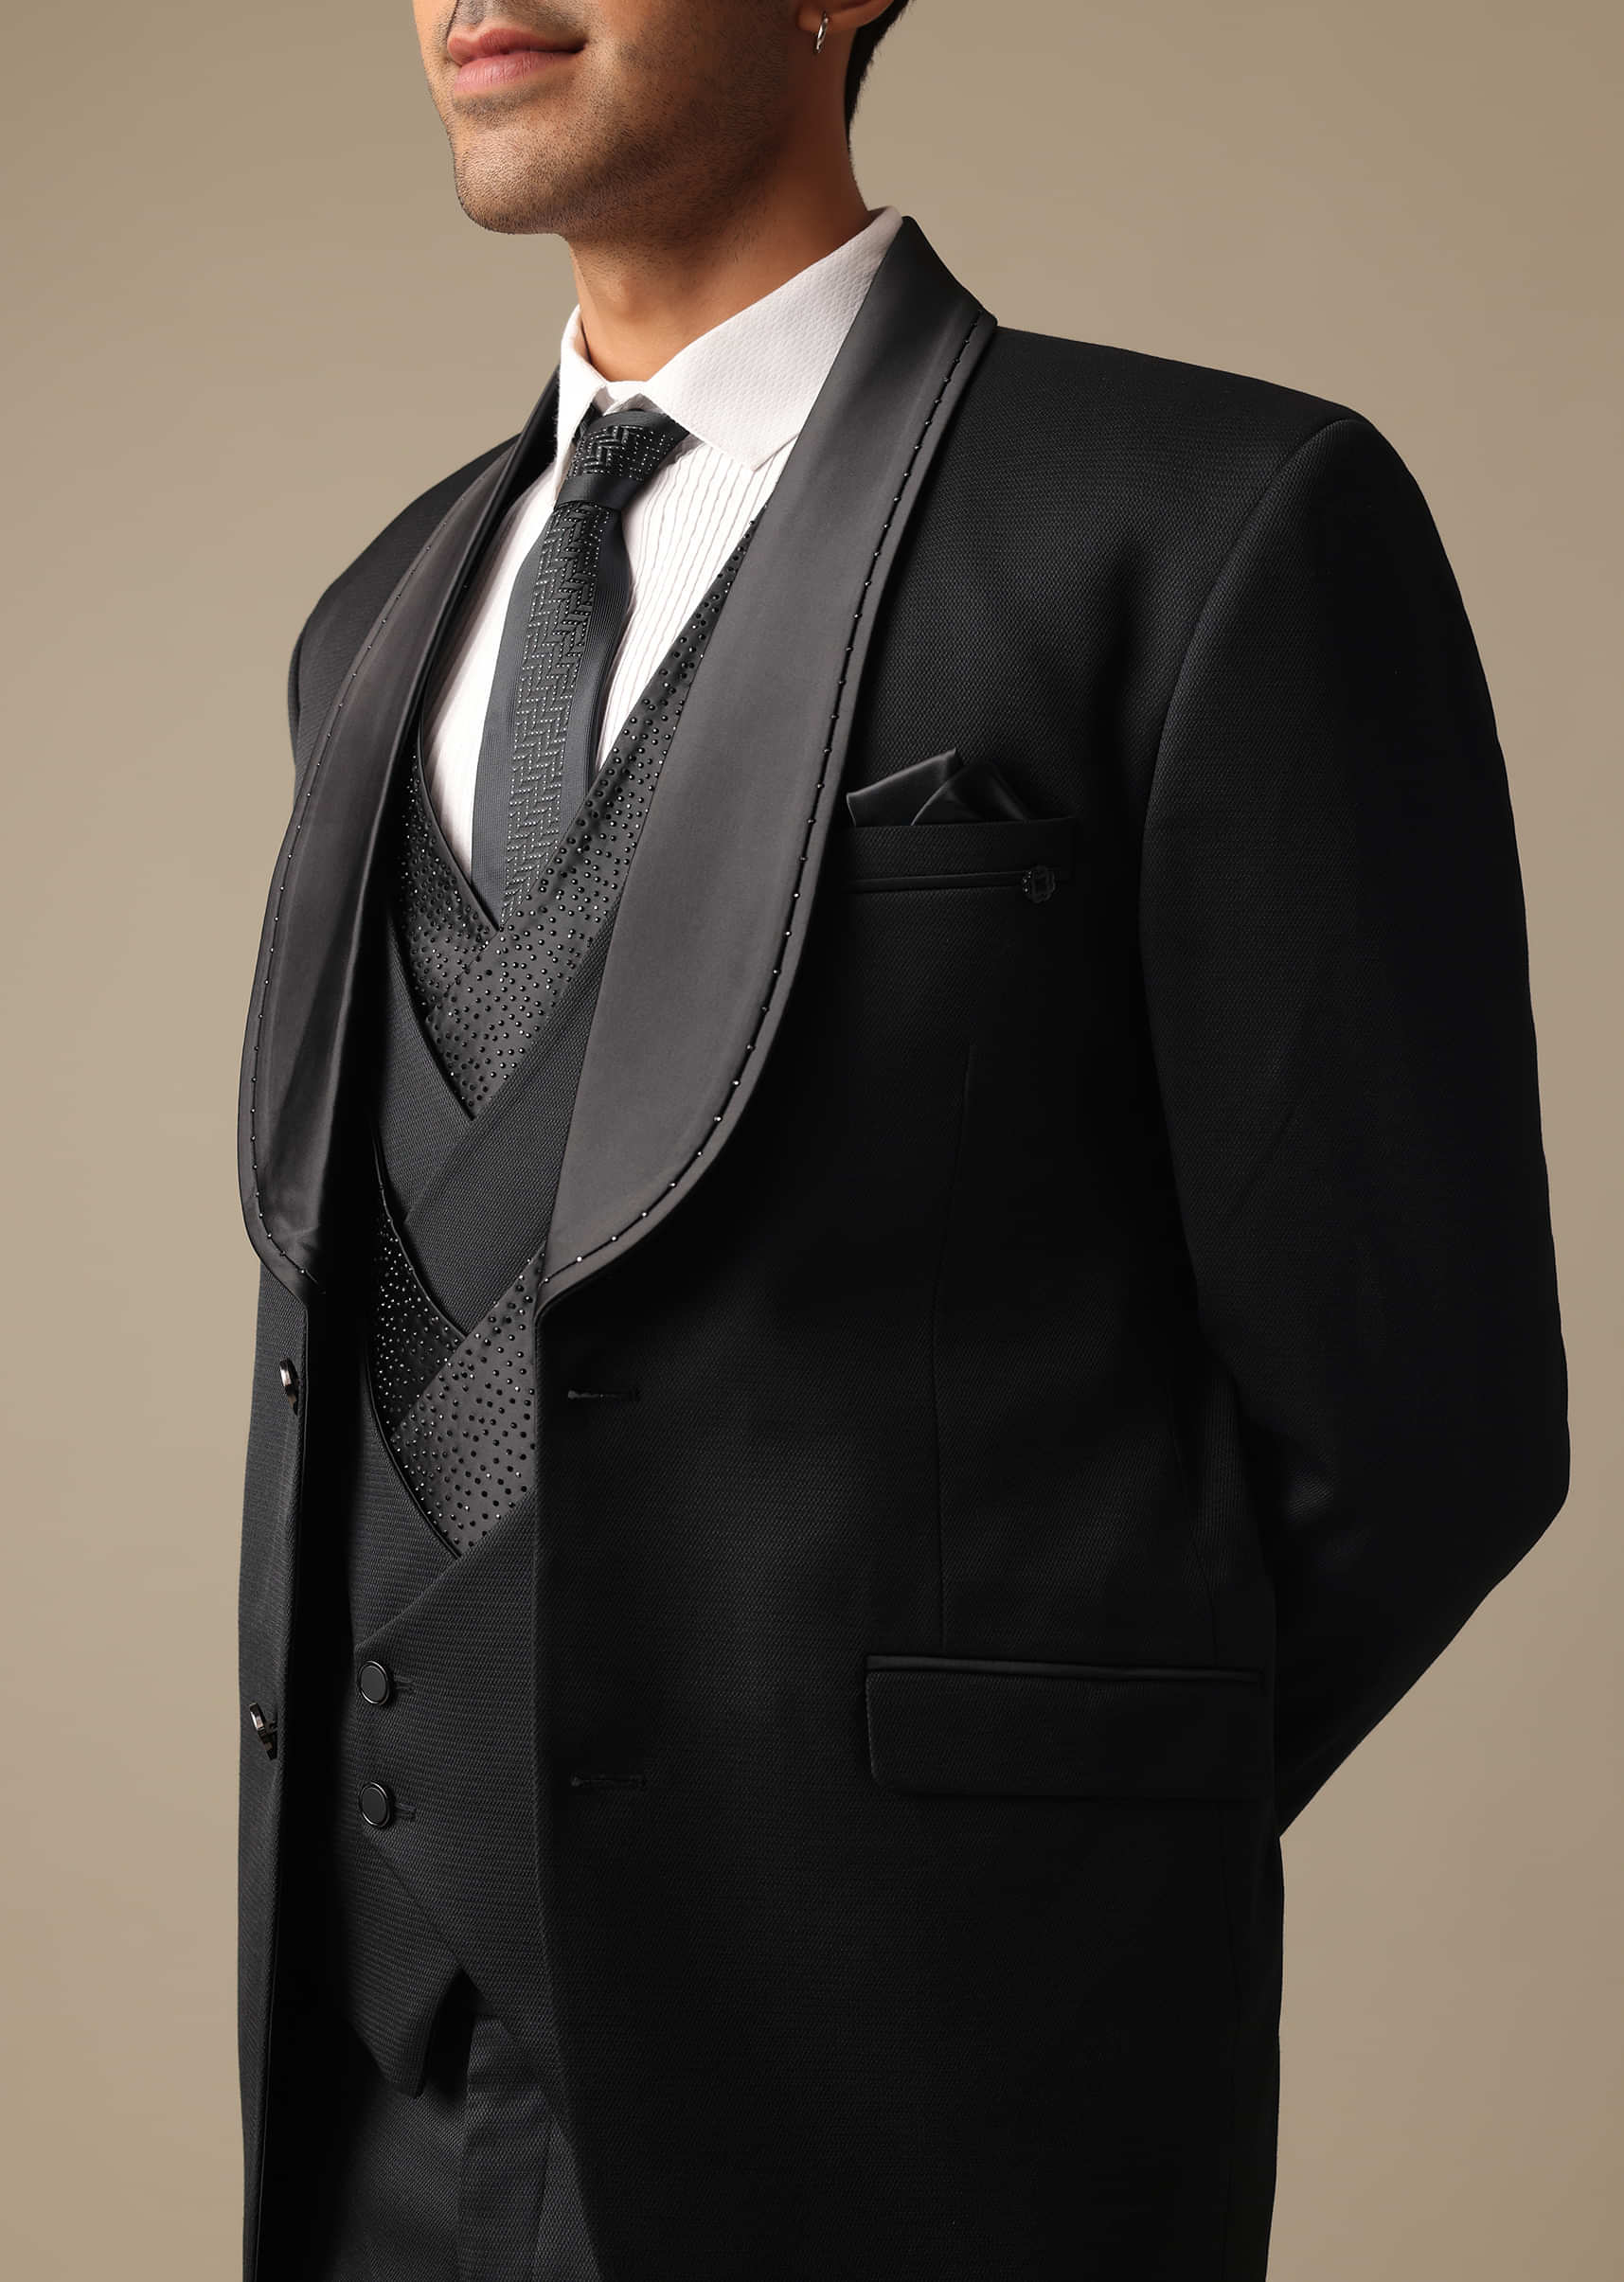 Buy Black Blazer And Pant Set Tuxedo In Terry Rayon